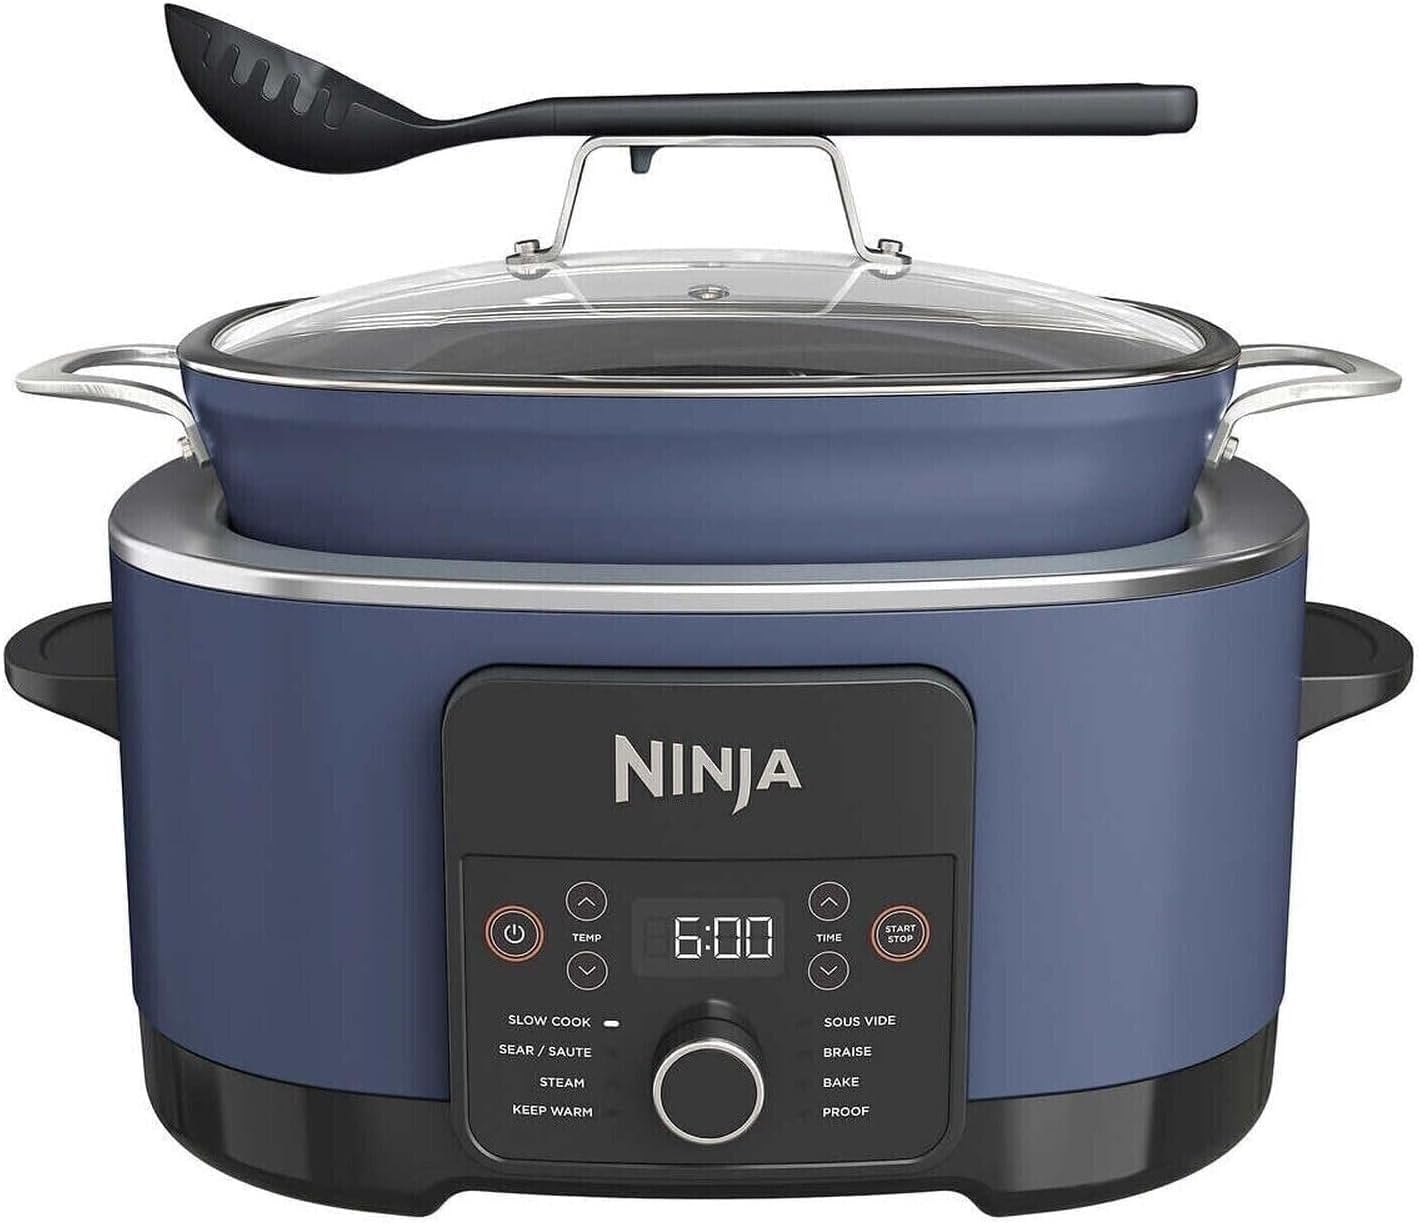 Ninja Foodi PossibleCooker PRO 8.5 Quart Multi-Cooker, with 8-in-1 Slow Cooker, Dutch Oven, Steamer  More, Glass Lid  Integrated Spoon, Nonstick, Oven Safe Pot to 500°F, Navy (Blue)